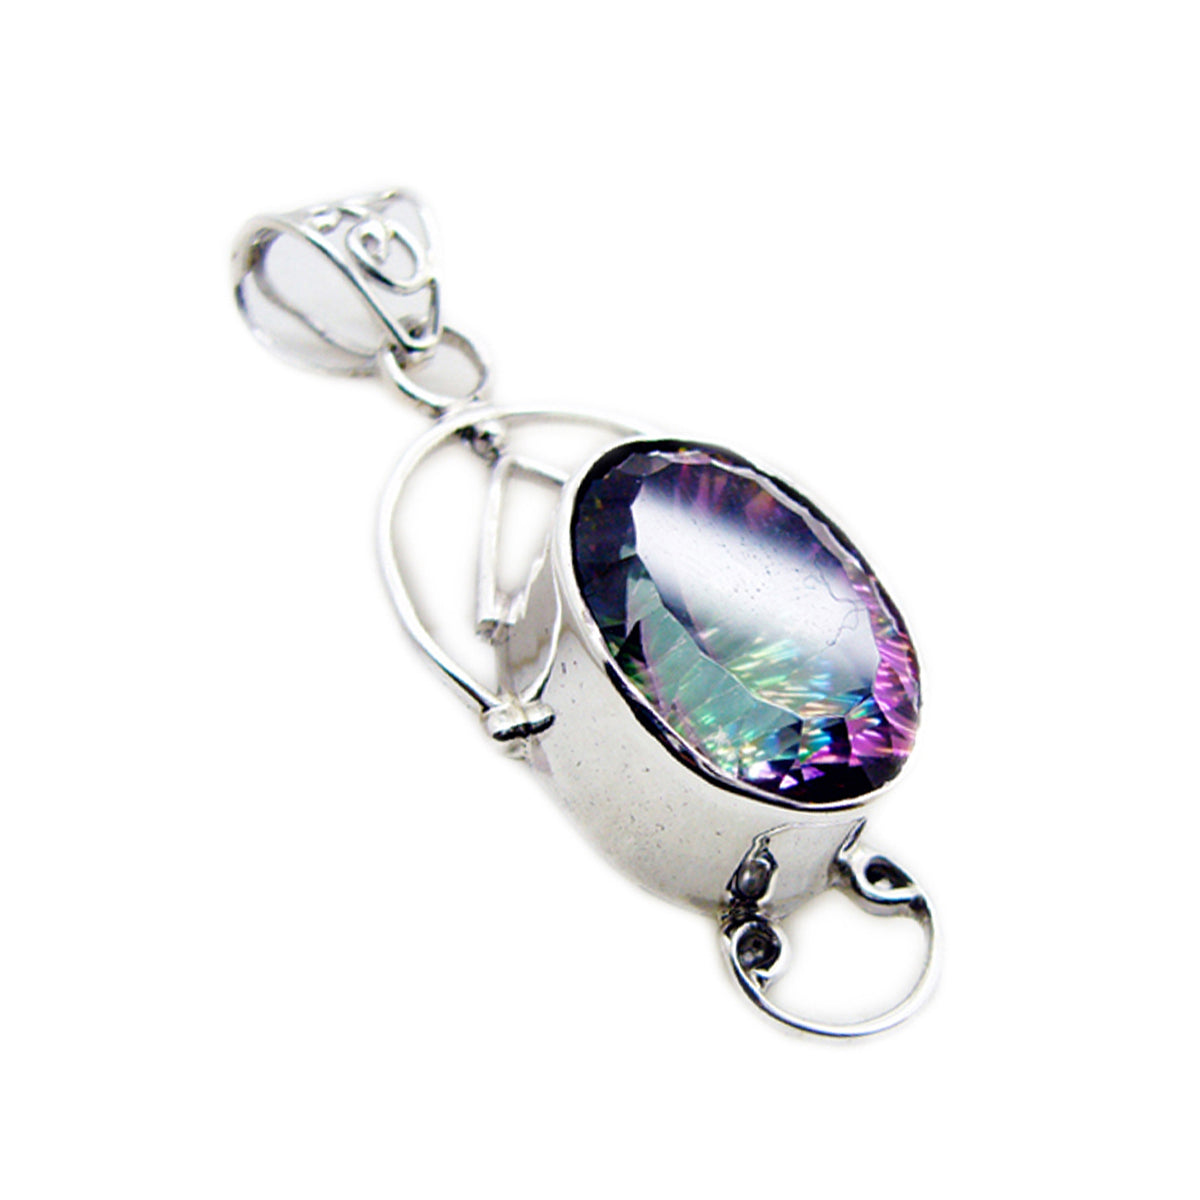 Riyo Winsome Gems Oval Faceted Multi Color Mystic Quartz Solid Silver Pendant Gift For Good Friday